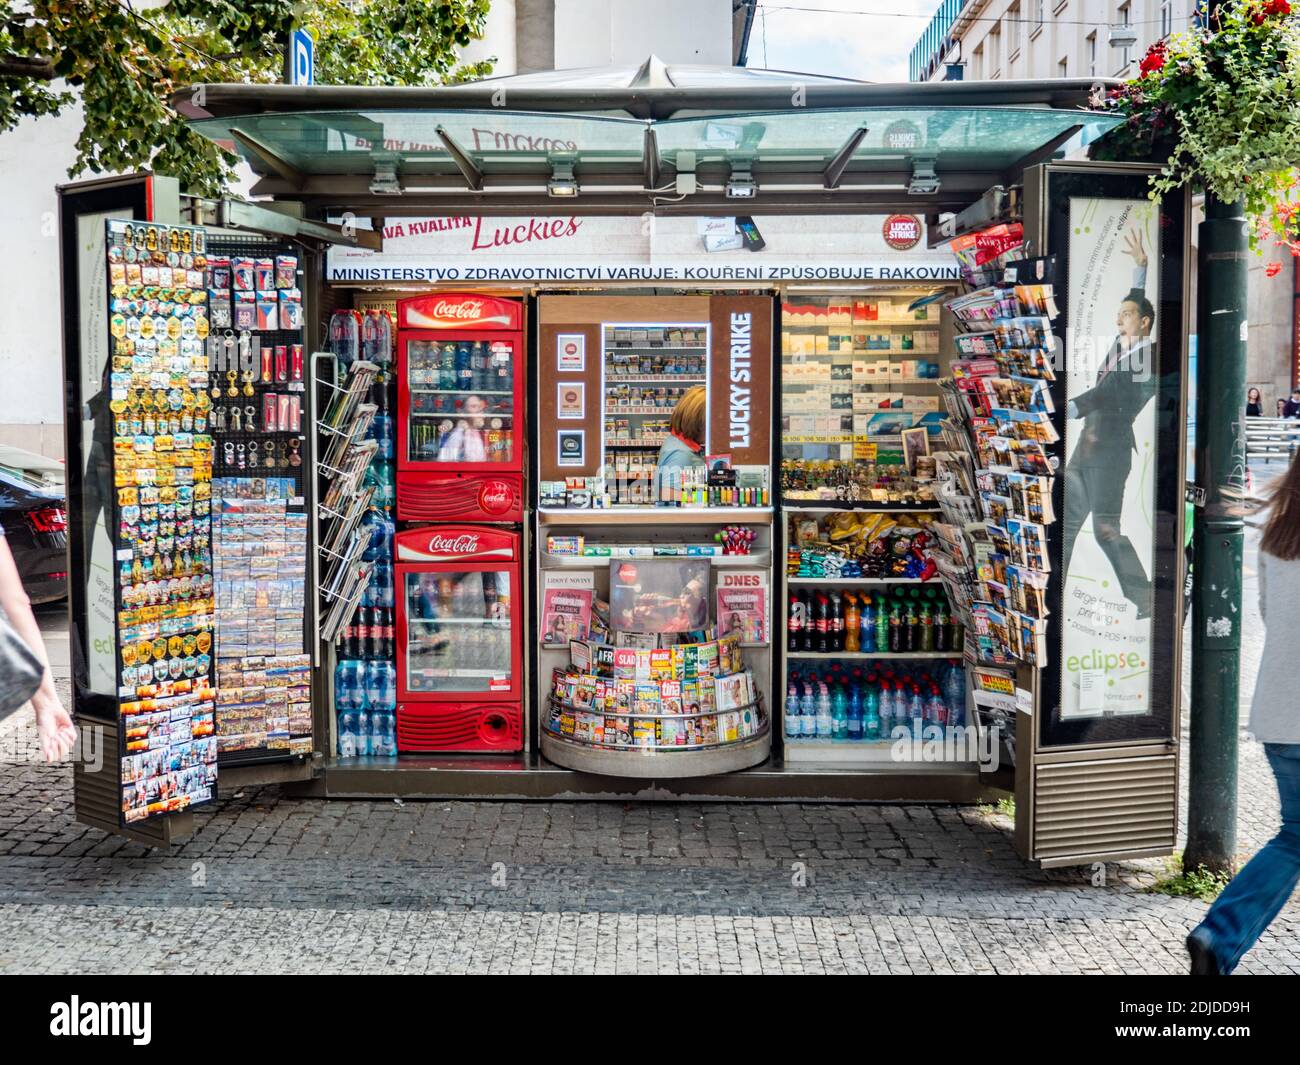 Pavement news vendor. A small kiosk on the cobbled streets of Prague selling newspapers, cigarettes, refreshments and souvenirs. Stock Photo